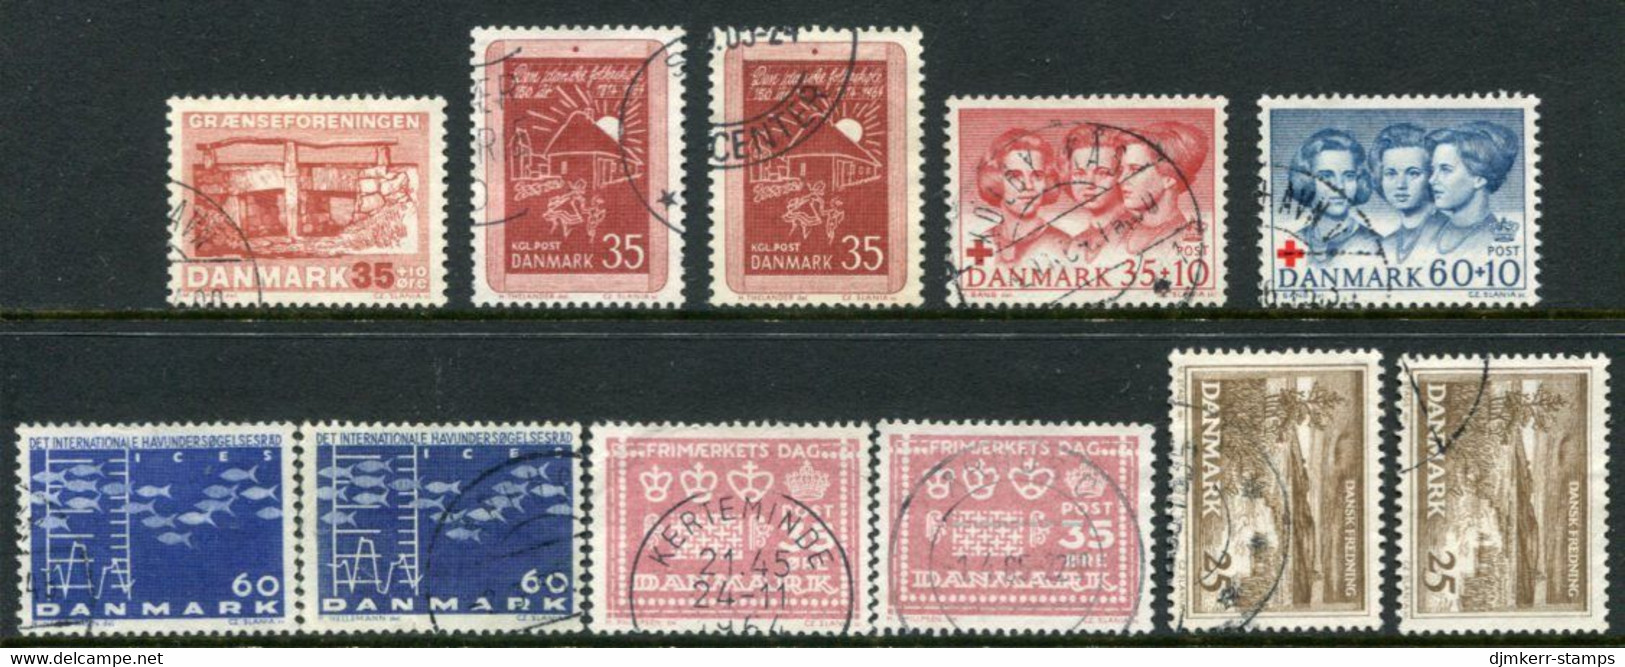 DENMARK 1964 Complete Issues With Ordinary And Fluorescent Papers, Used Michel 419-425y - Used Stamps